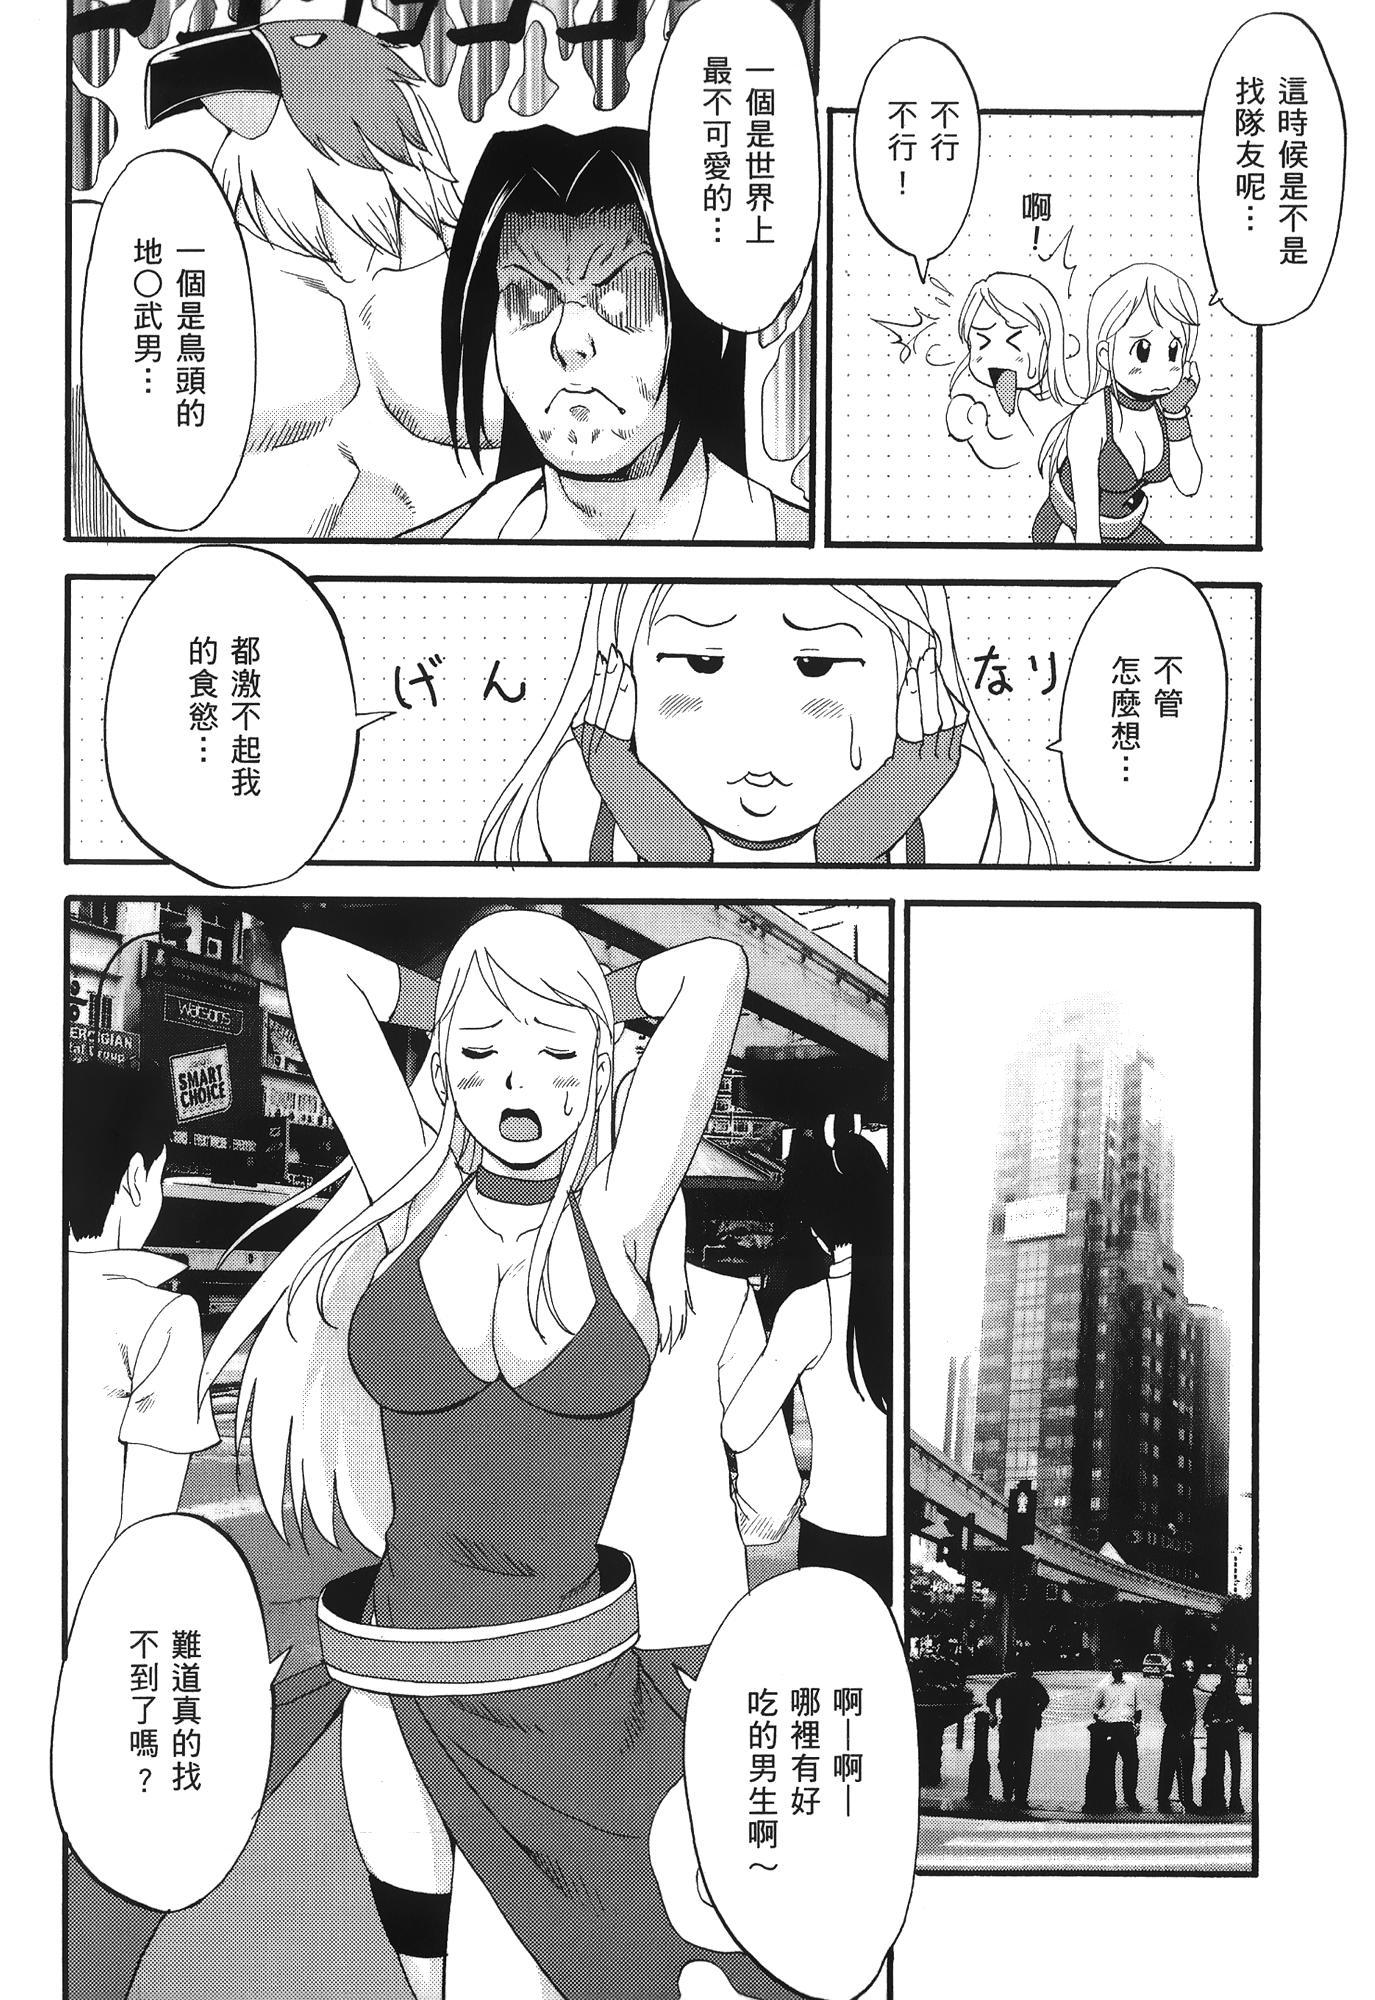 Naked [Saigado] THE YURI & FRIENDS 6 (King of Fighters) | 武鬥美少女 [Chinese] - King of fighters Dirty Talk - Page 3